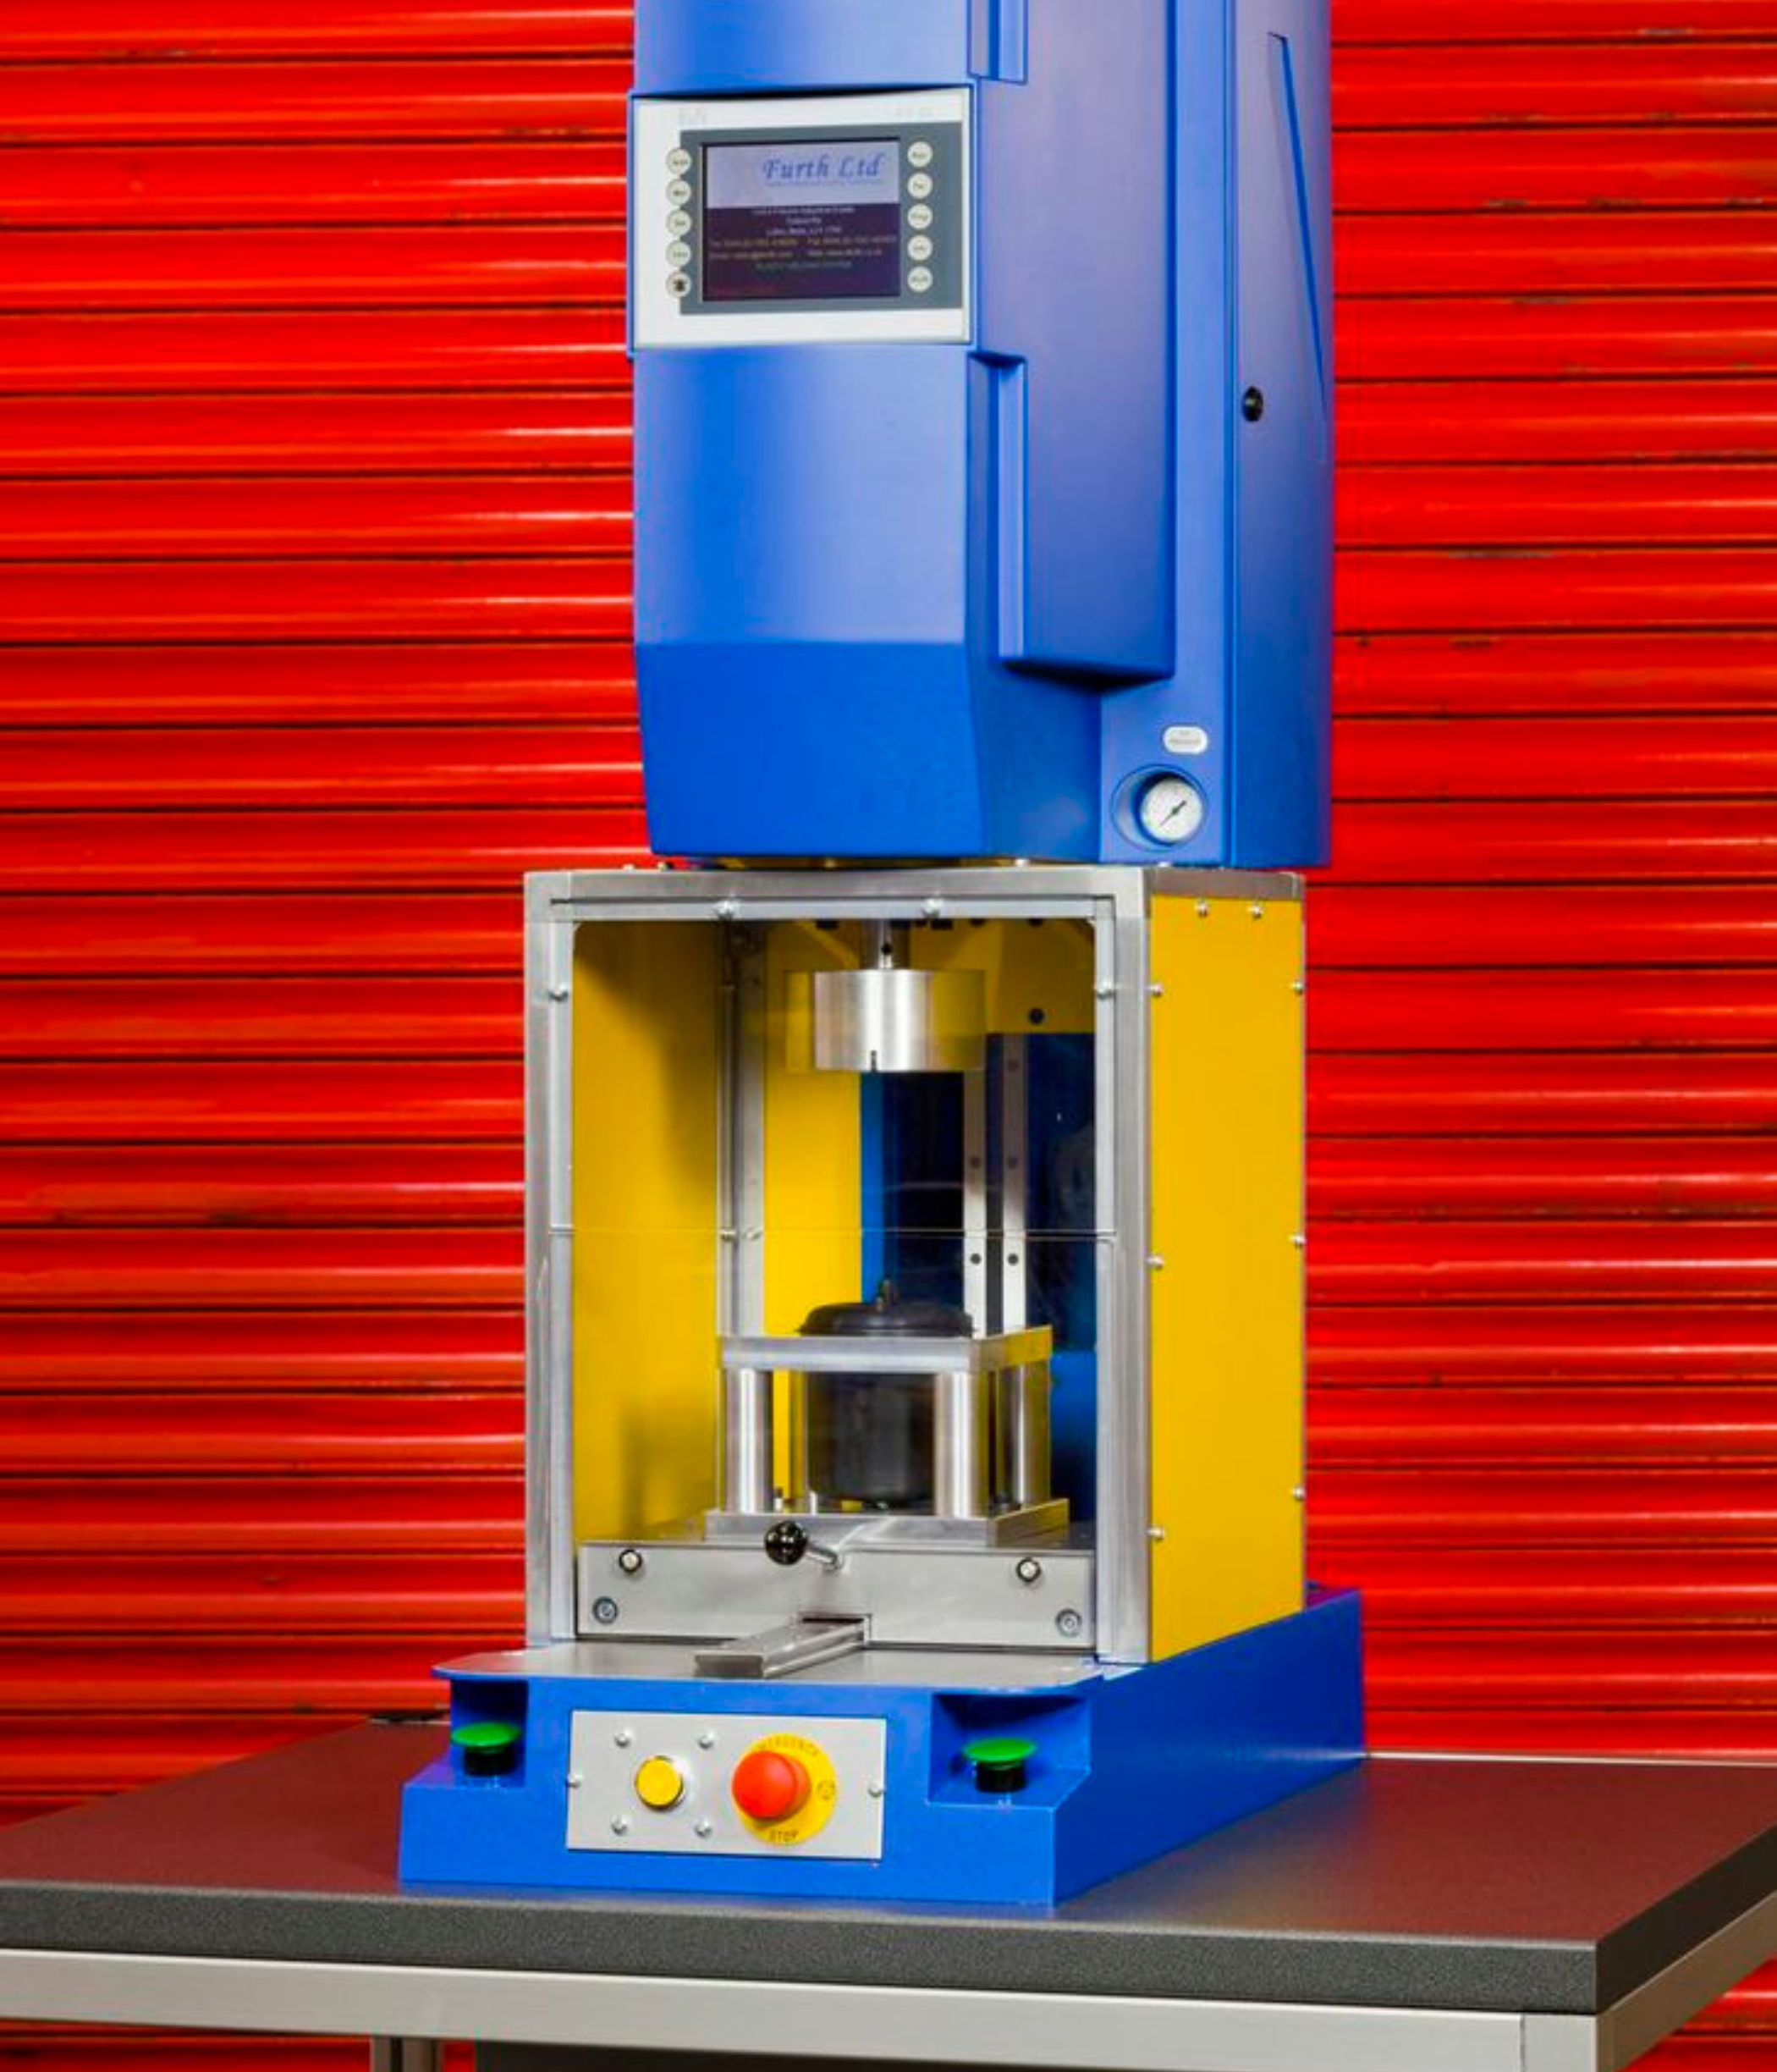 Industrial vibration welding machine with a blue vertical body and a yellow safety guard,  showcasing the advanced equipment used for creating seamless assemblies in manufacturing processes.